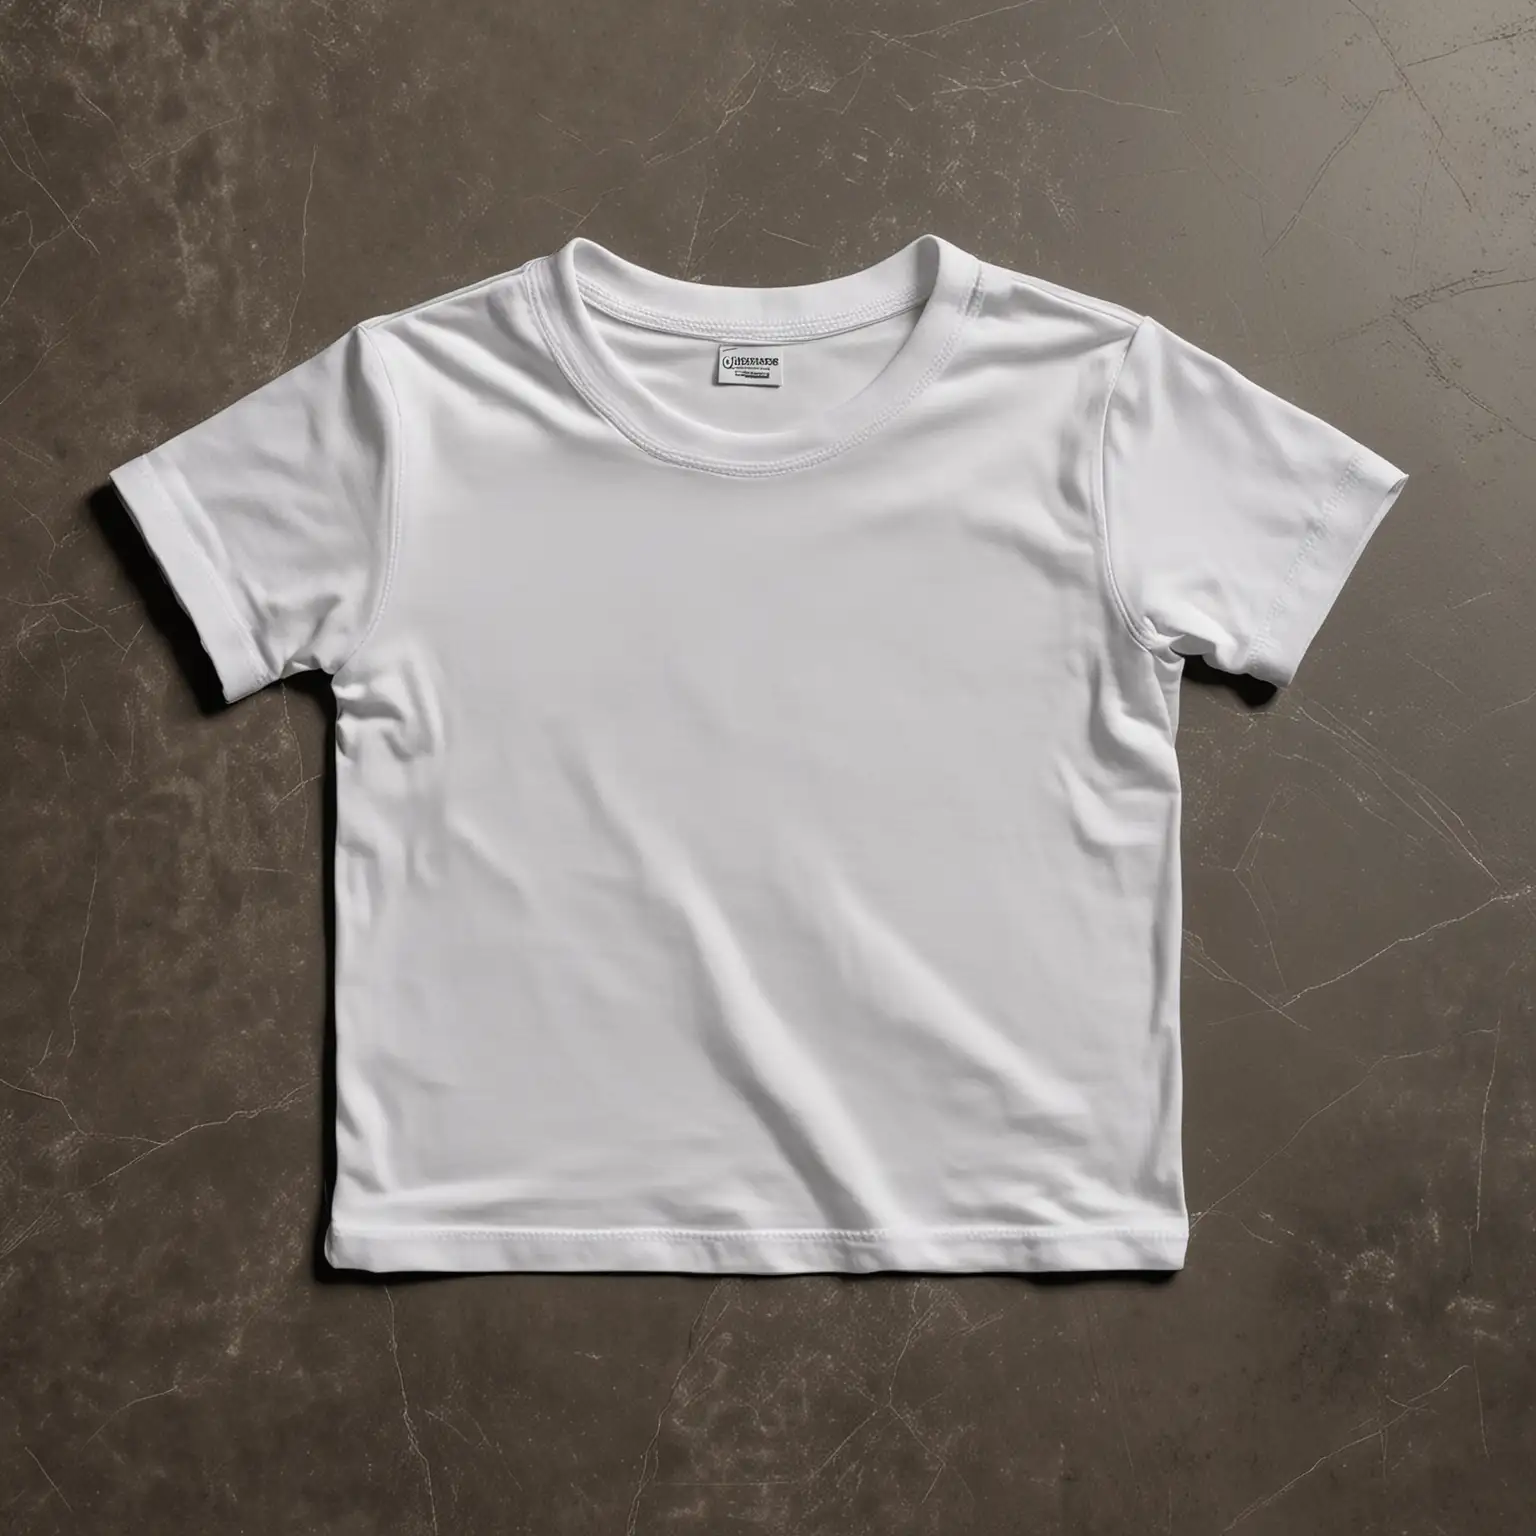 hyper realistic ironed simmetrical proportional white slim toddler tshirt no wrinkles, lied on floor seen from above with dark background floor